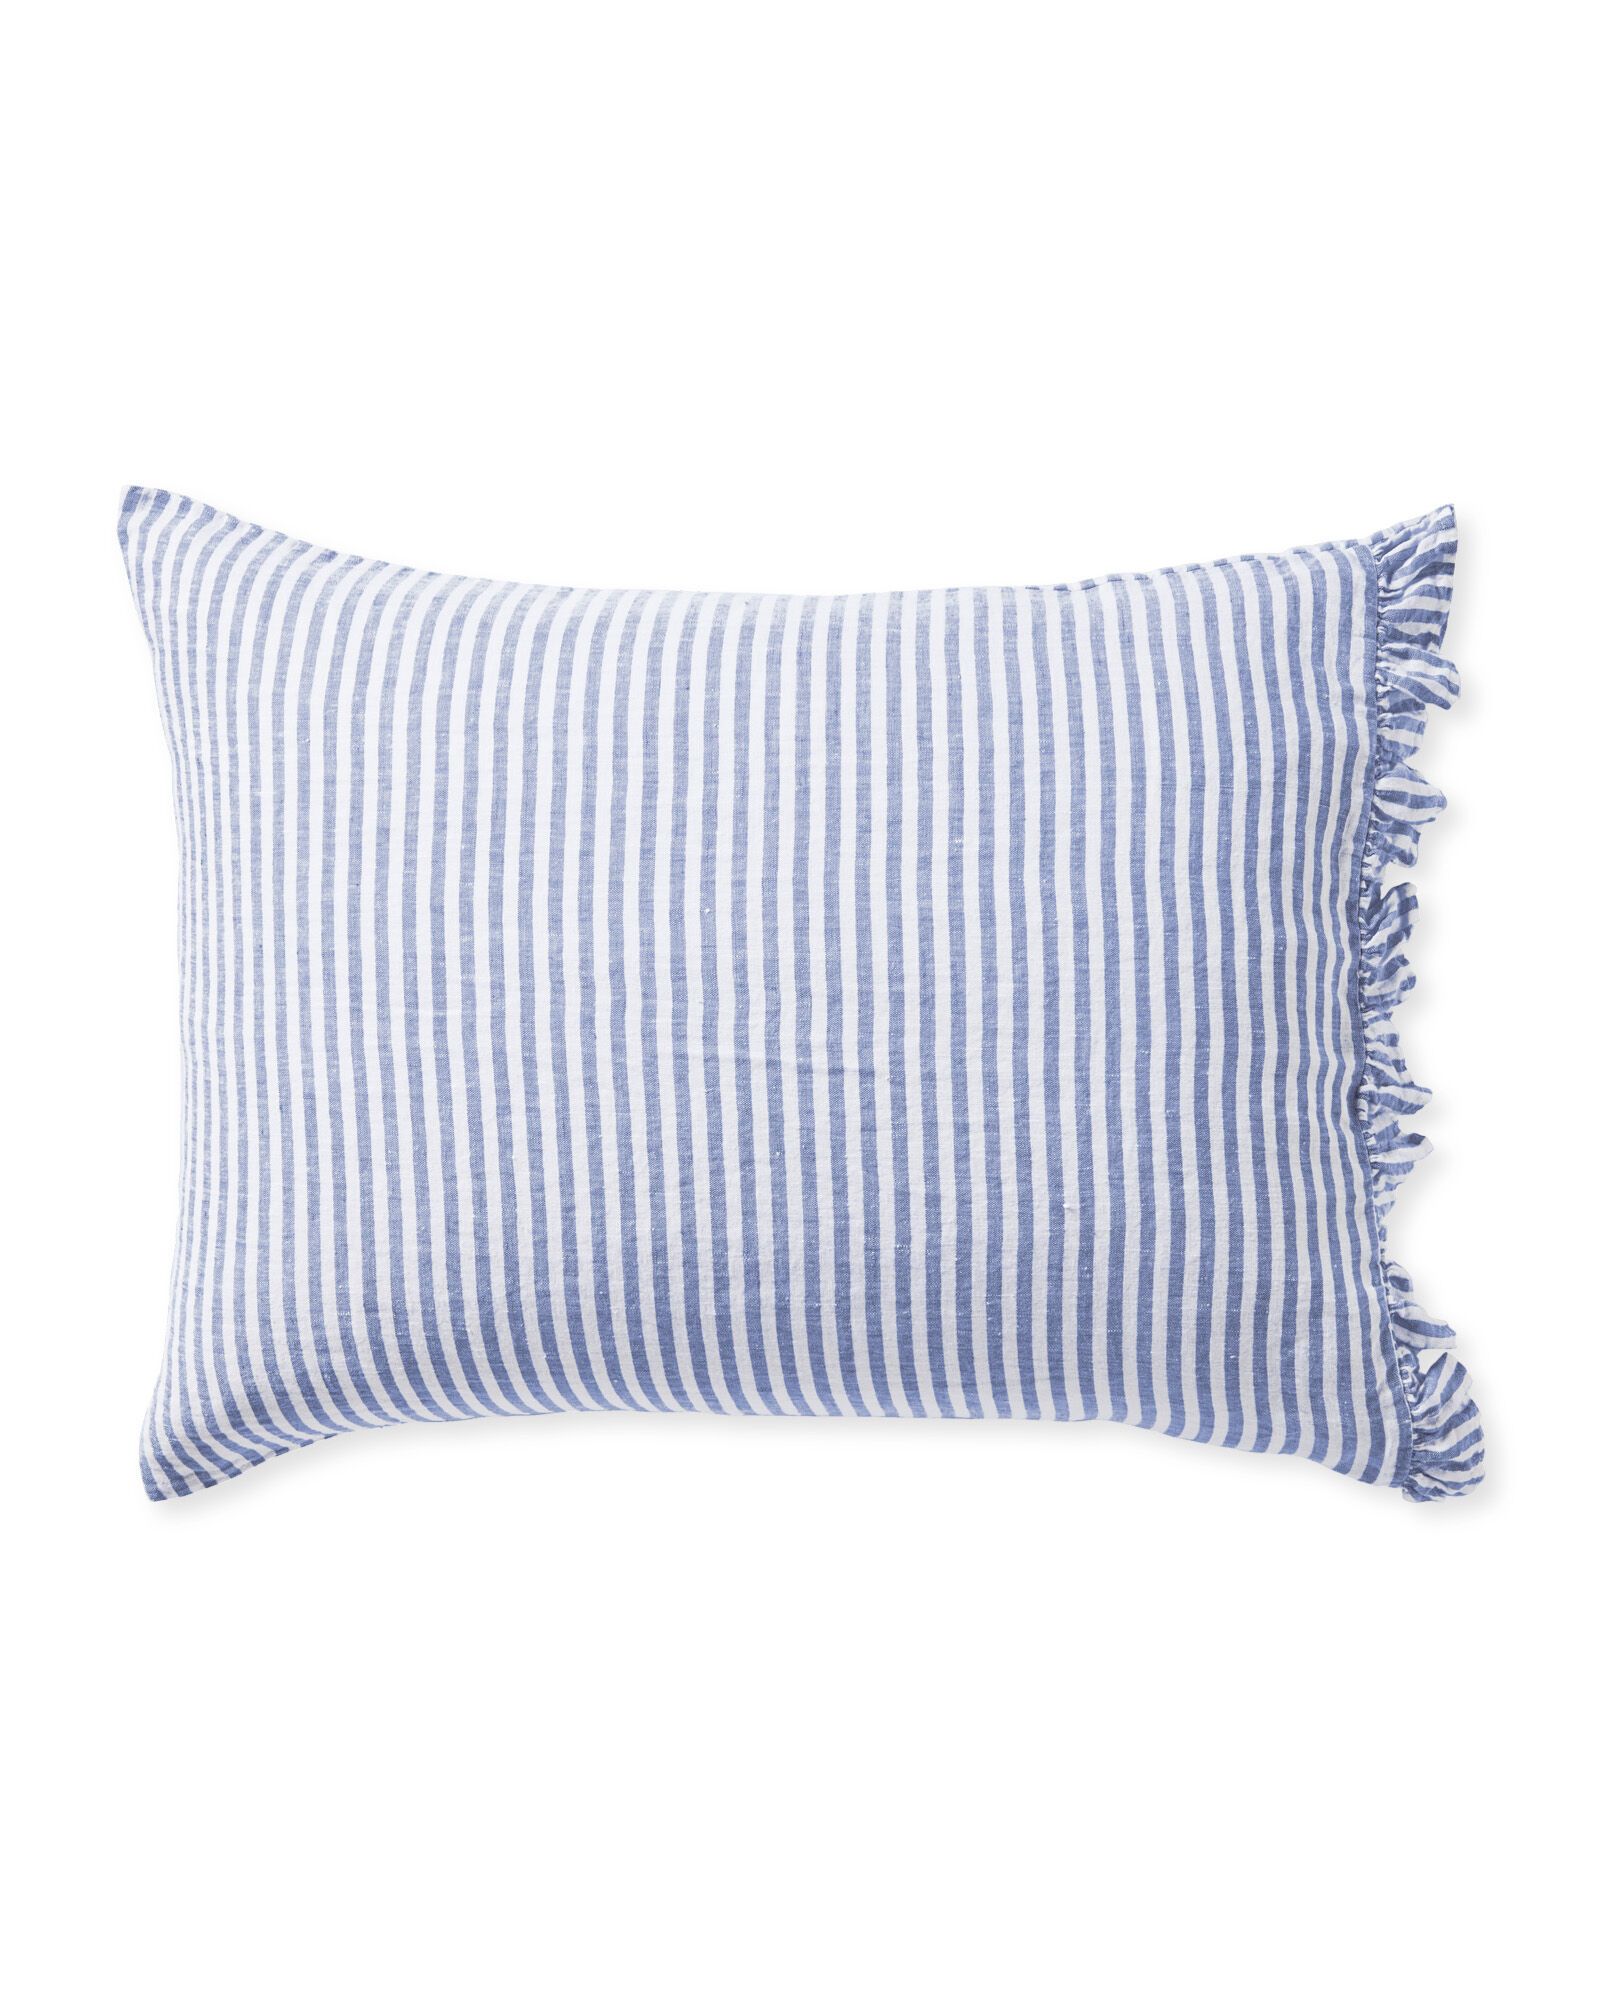 Nantucket Stripe Pillowcases (Set of 2) | Serena and Lily